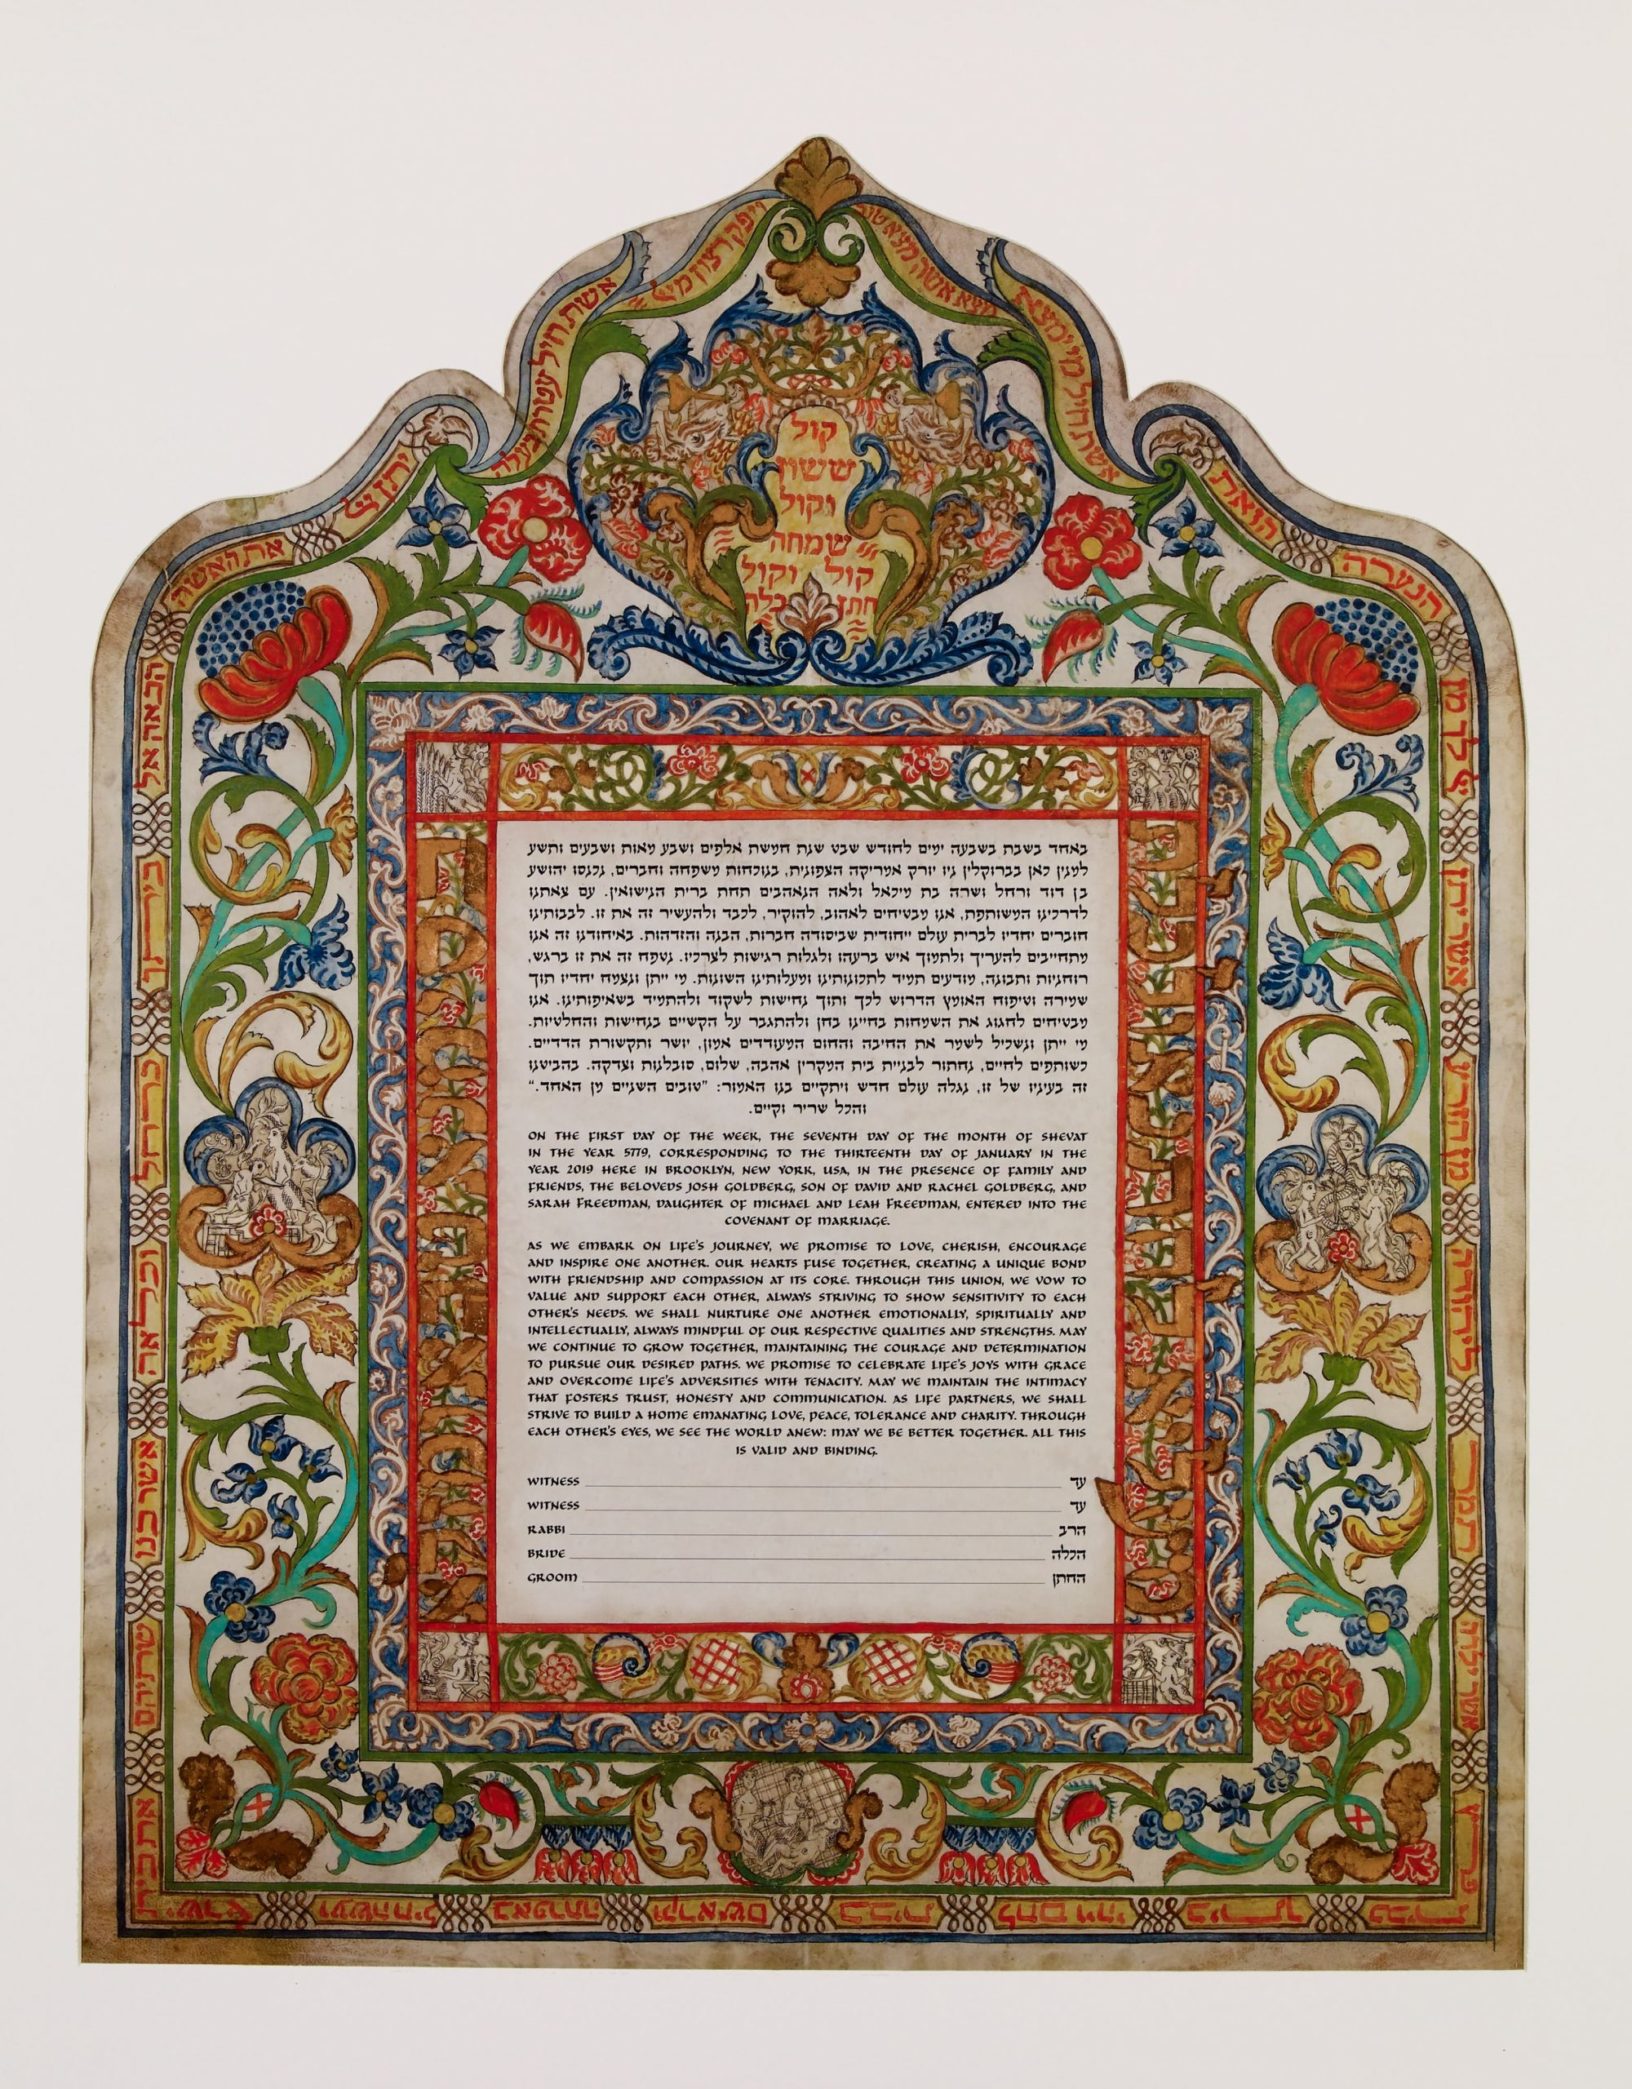 Trieste, Italy, 1774 Ketubah Jewish Marriage Contracts by The Jewish Museum